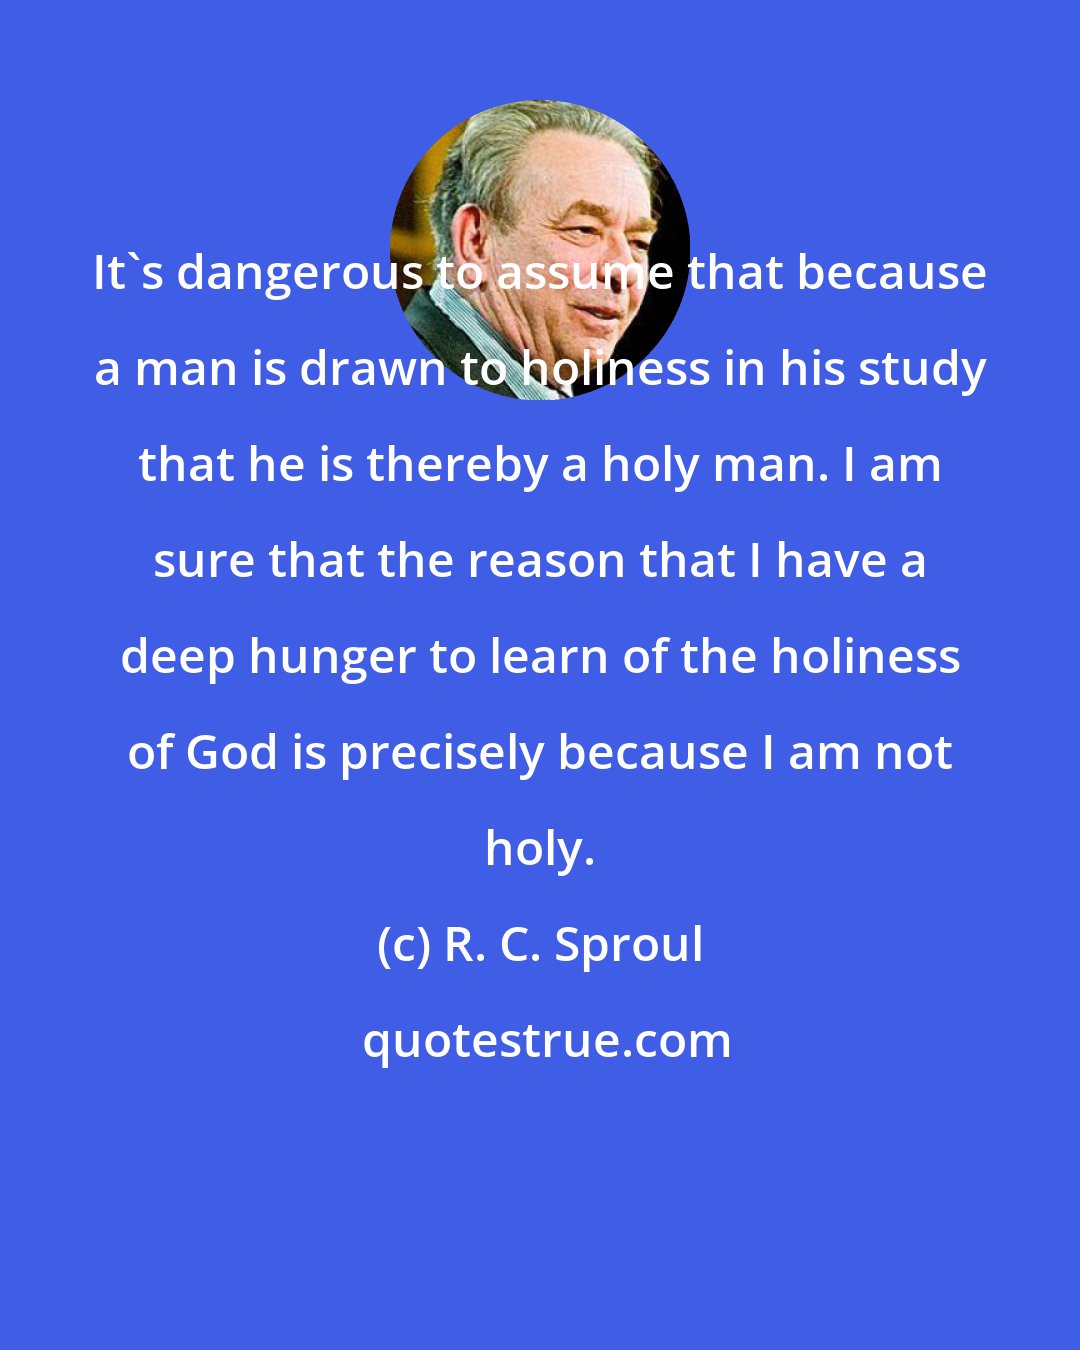 R. C. Sproul: It's dangerous to assume that because a man is drawn to holiness in his study that he is thereby a holy man. I am sure that the reason that I have a deep hunger to learn of the holiness of God is precisely because I am not holy.